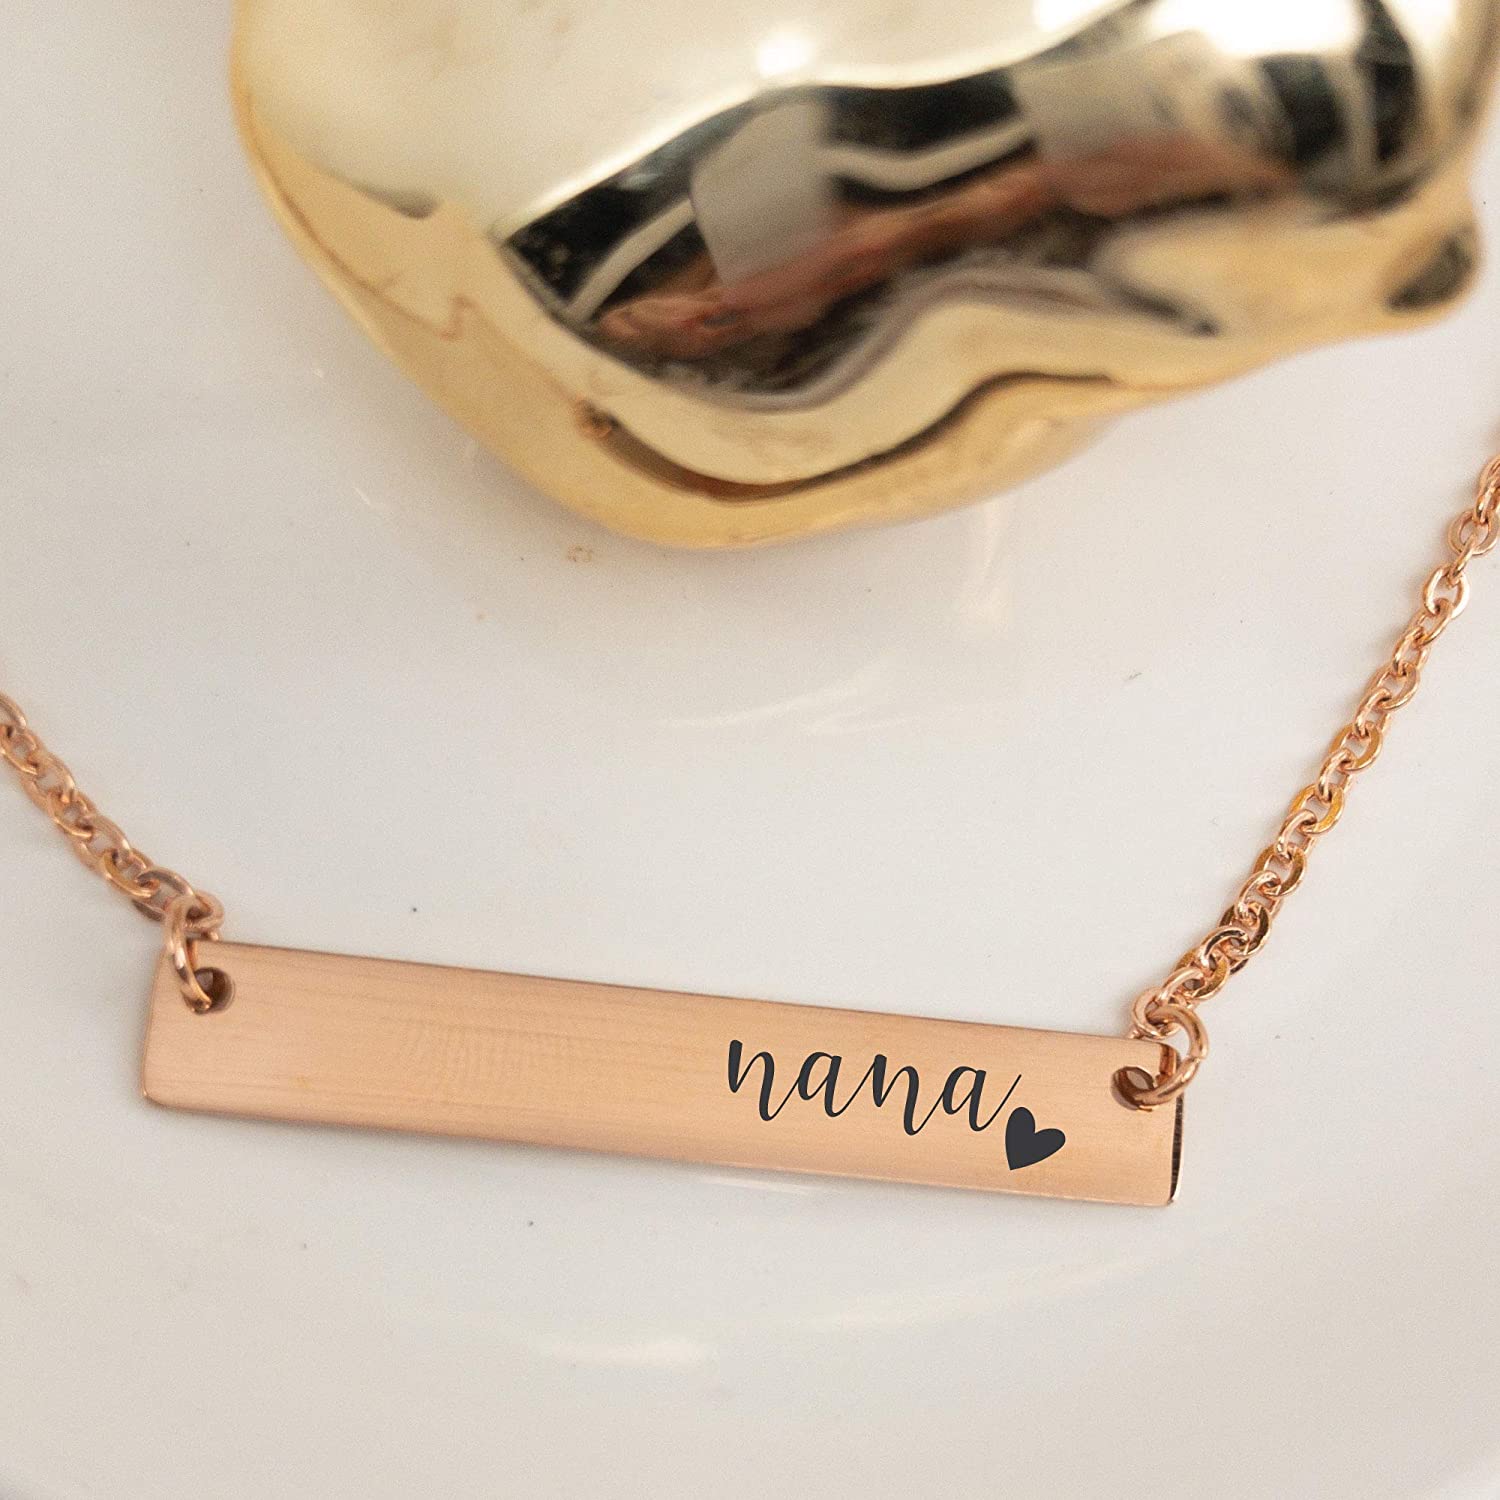 25-gifts-for-new-grandparents-personalized-nana-necklace